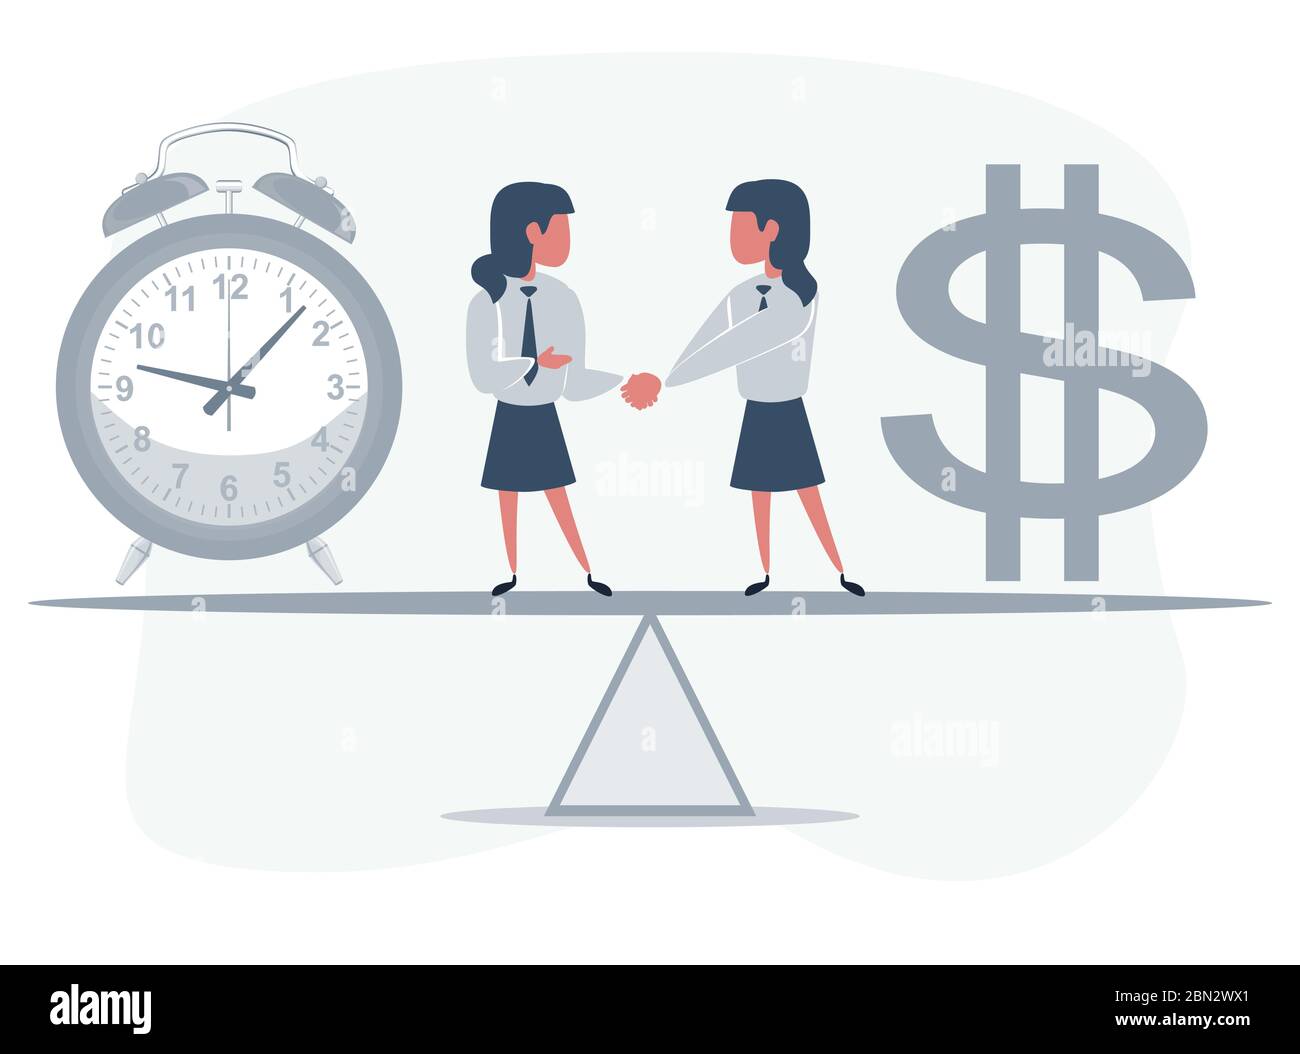 Business partners shaking hands as a symbol of unity. Business people standing on seesaw between clock and money. Stock Vector